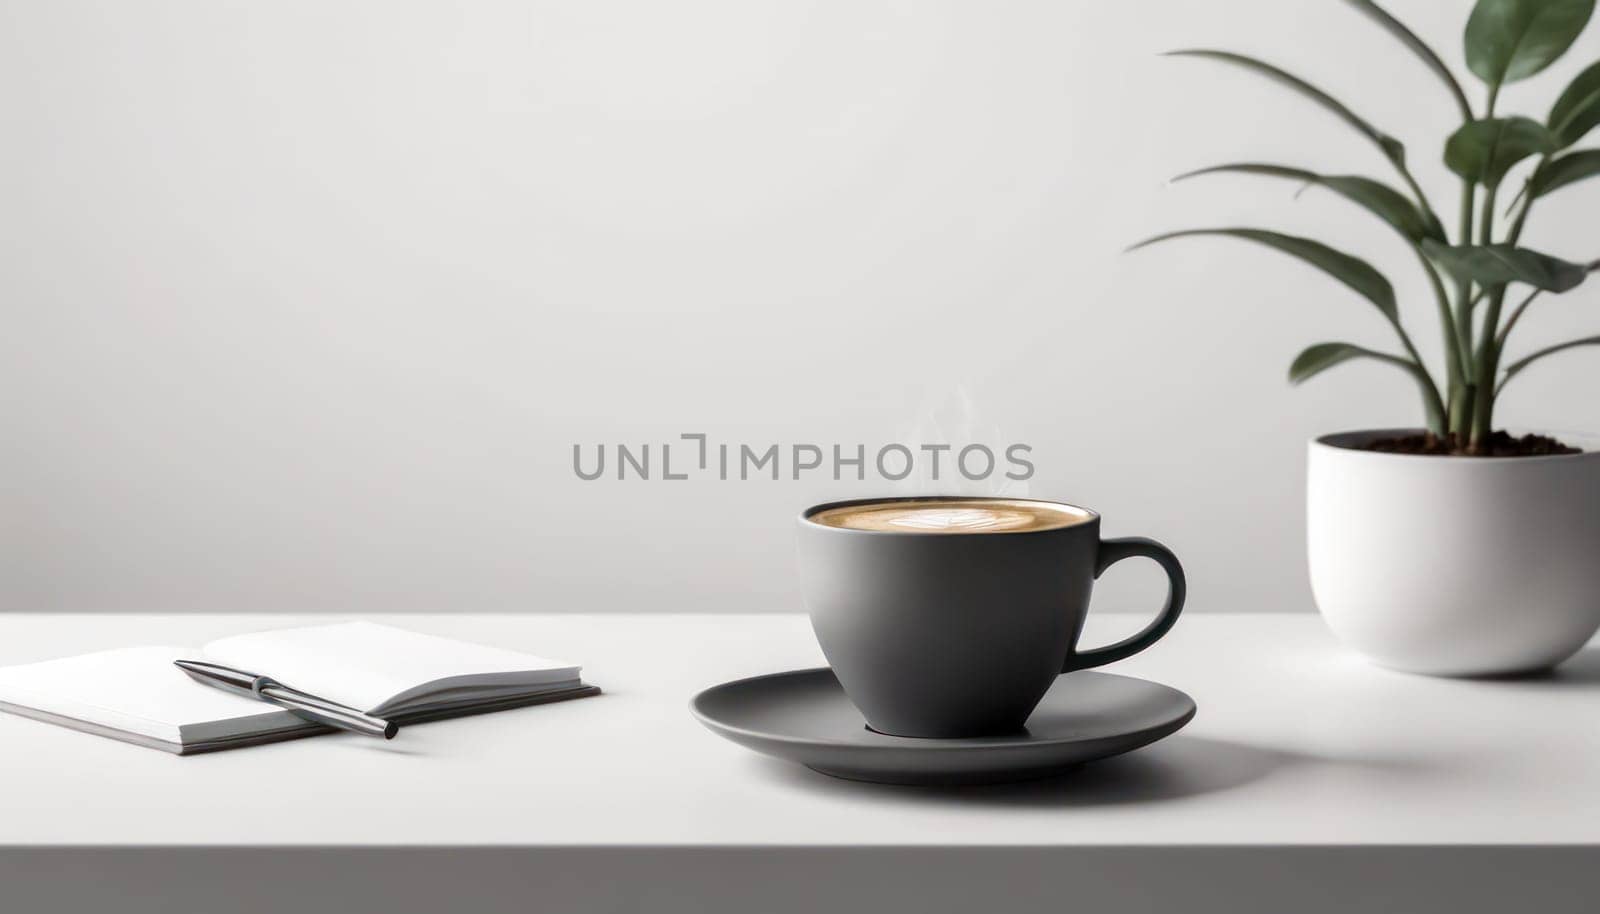 Morning Coffee: Cup filled with steaming coffee rests on a clean white table, casting a subtle shadow. creating a serene morning scene. by Matiunina